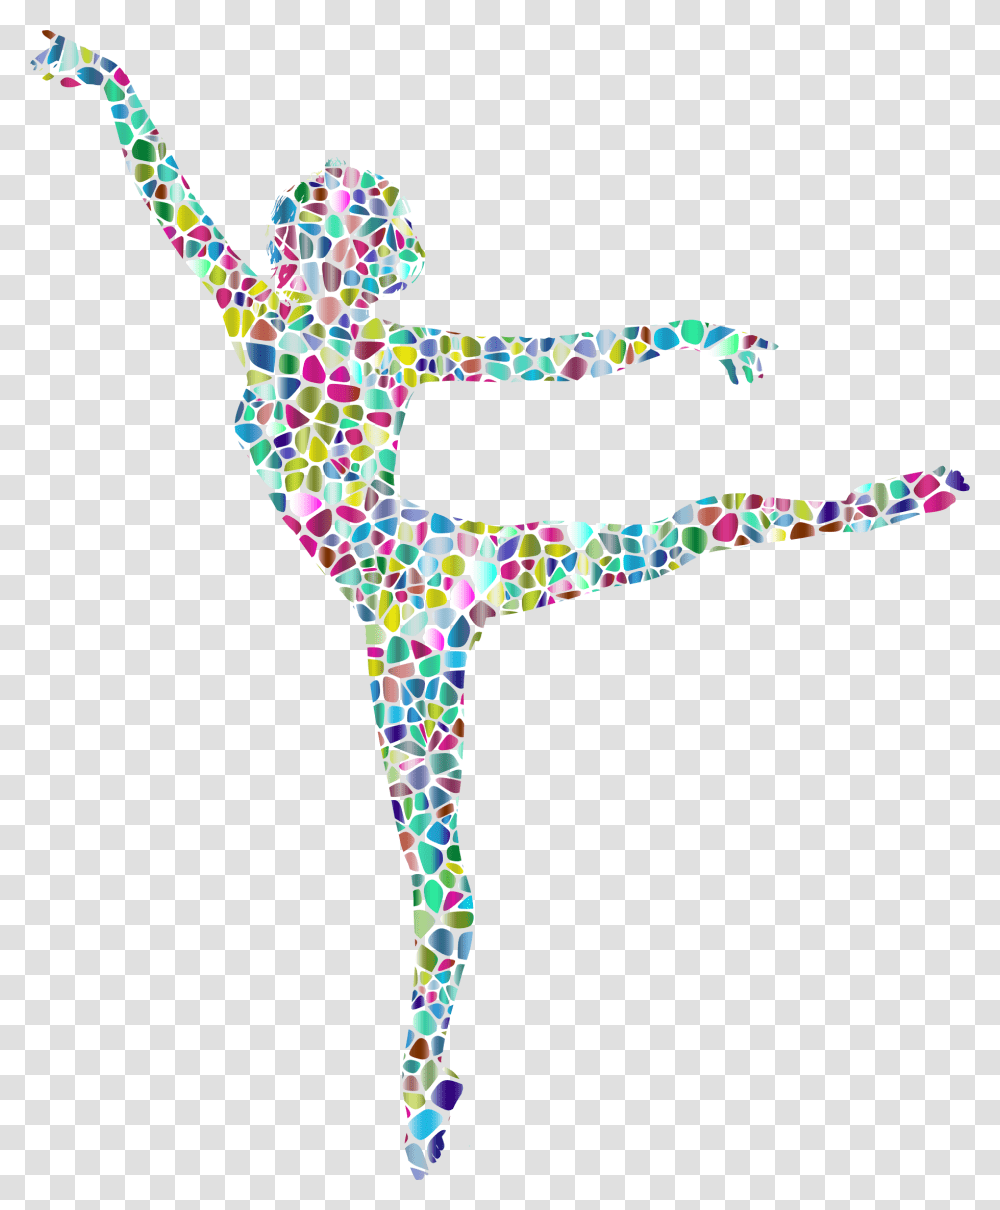 Polychromatic Tiled Lithe Dancing Woman Silhouette Background Dancer Silhouettes, Cross, Light, Leisure Activities, Dance Pose Transparent Png